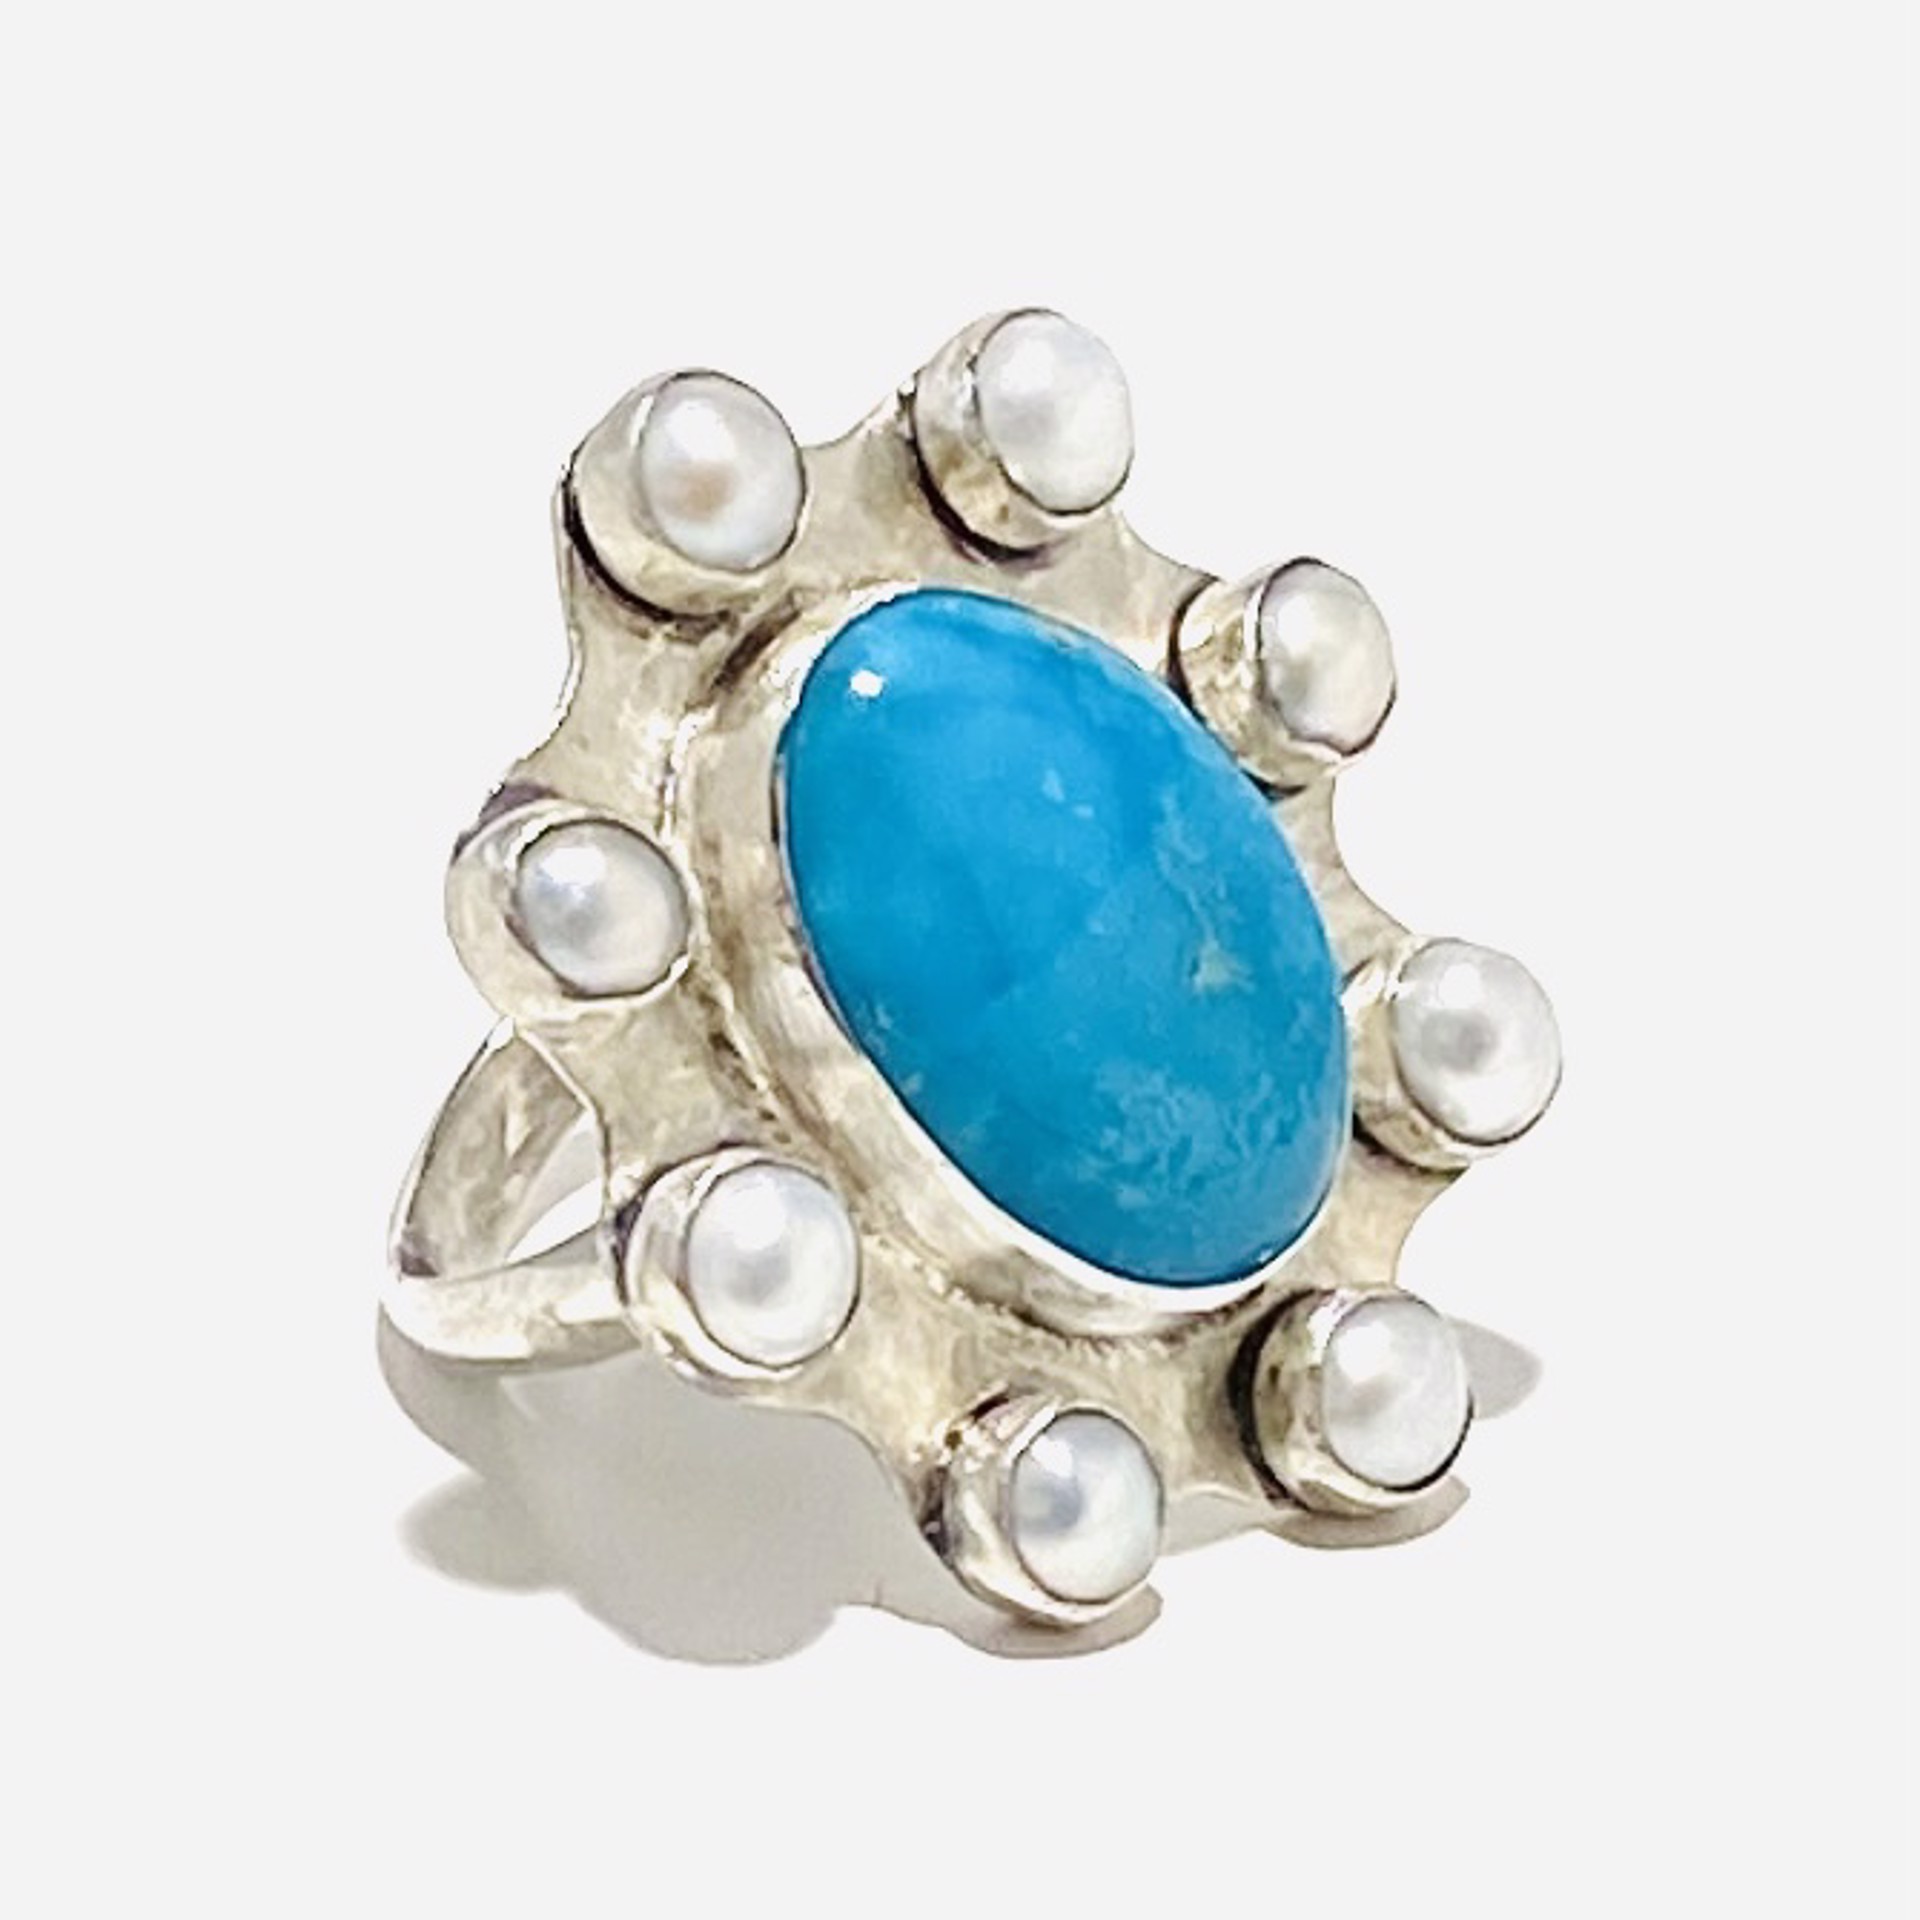 AB23-1 Oval Alpine Village Turquoise Cabochon with Eight Pearls Ring sz8 by Anne Bivens